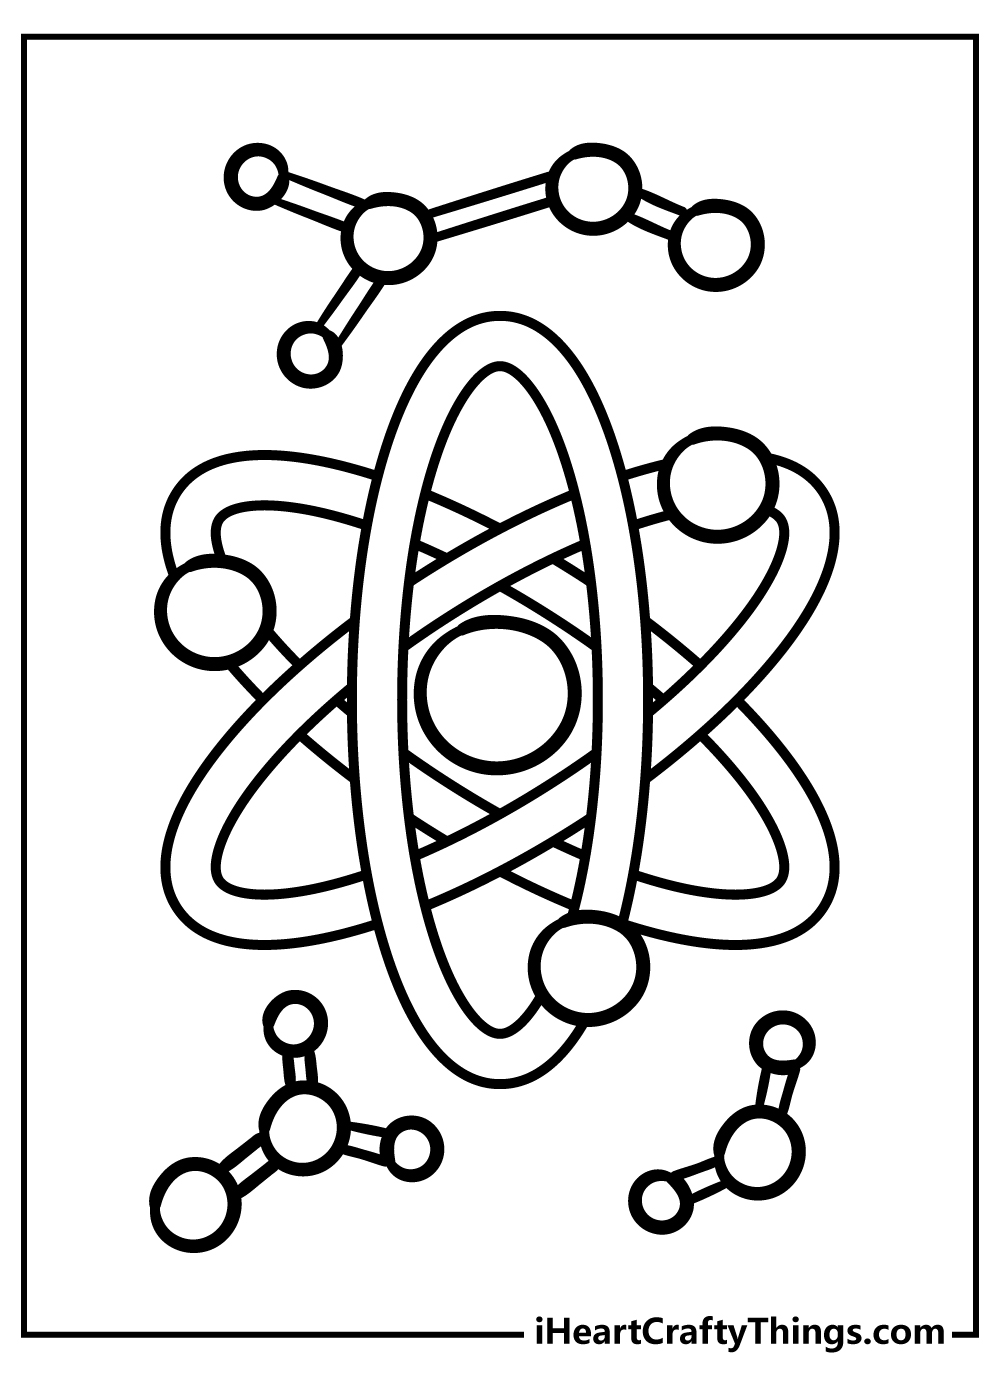 Science Coloring Sheet for children free download